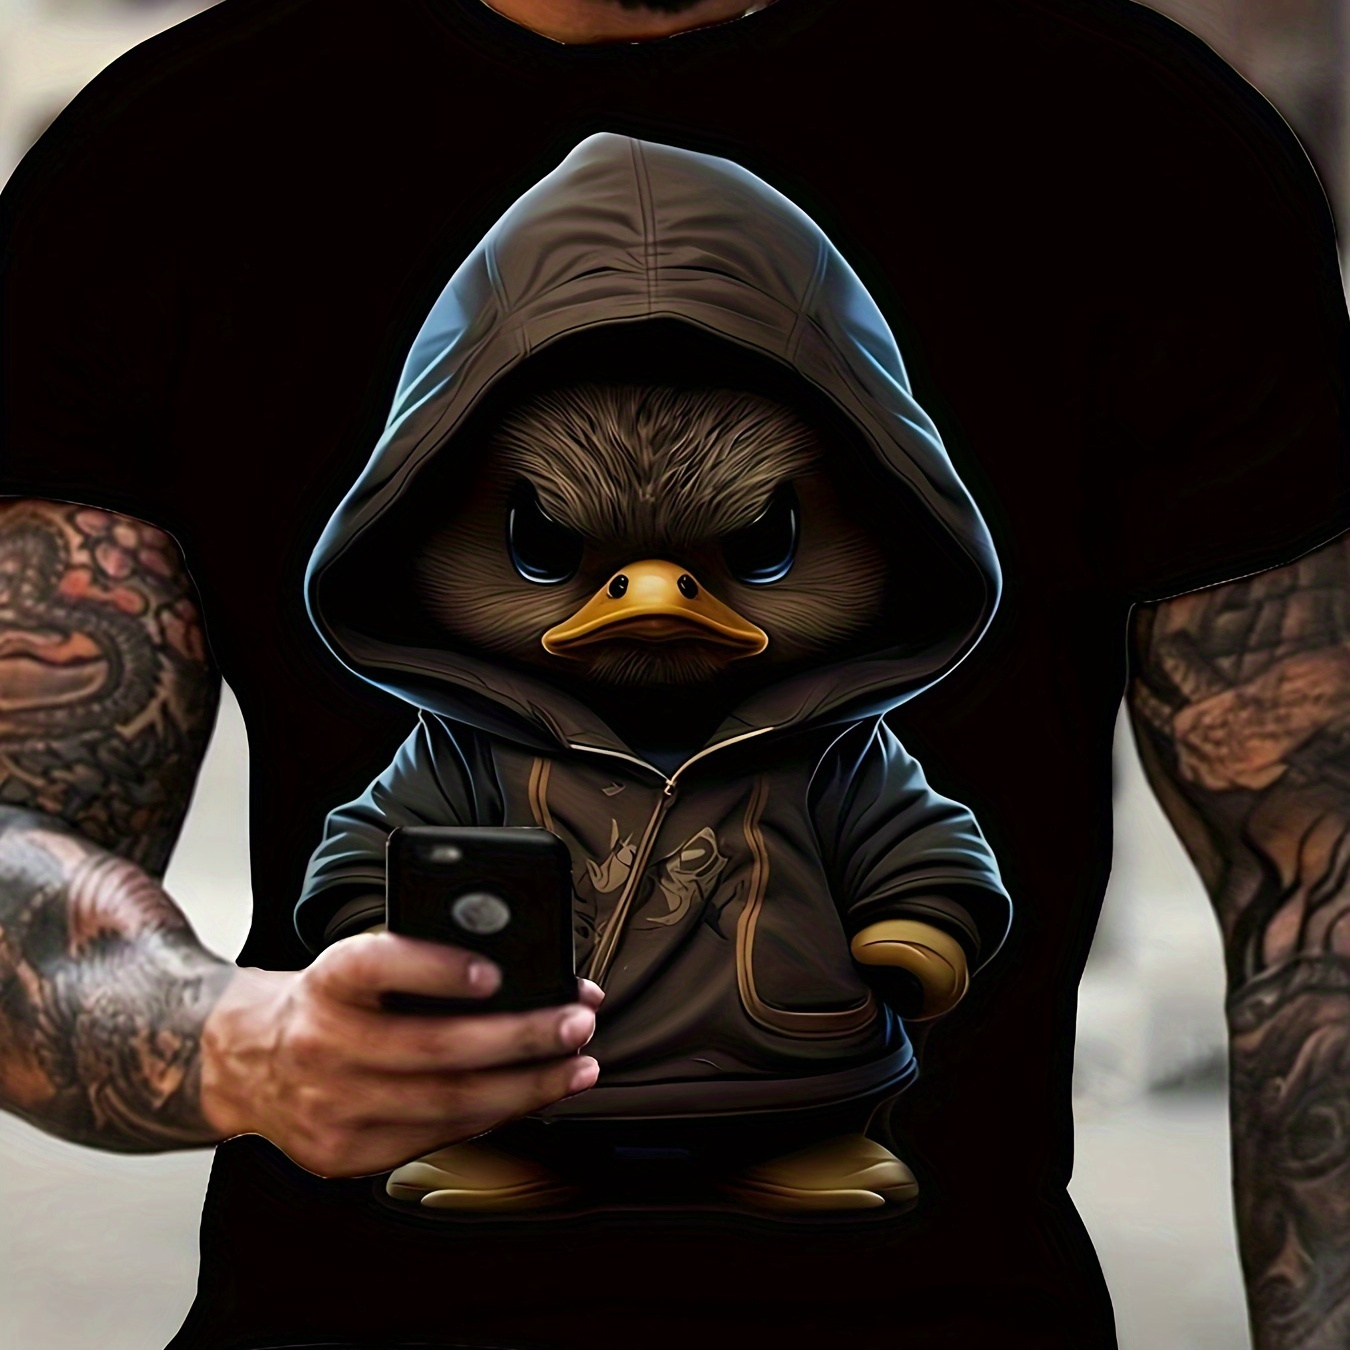 

3d Digital Angry Duck With Hoodie Pattern T-shirt With Crew Neck And Short Sleeve, Novel And Stylish Comfy Tops For Men's Summer Street Wear